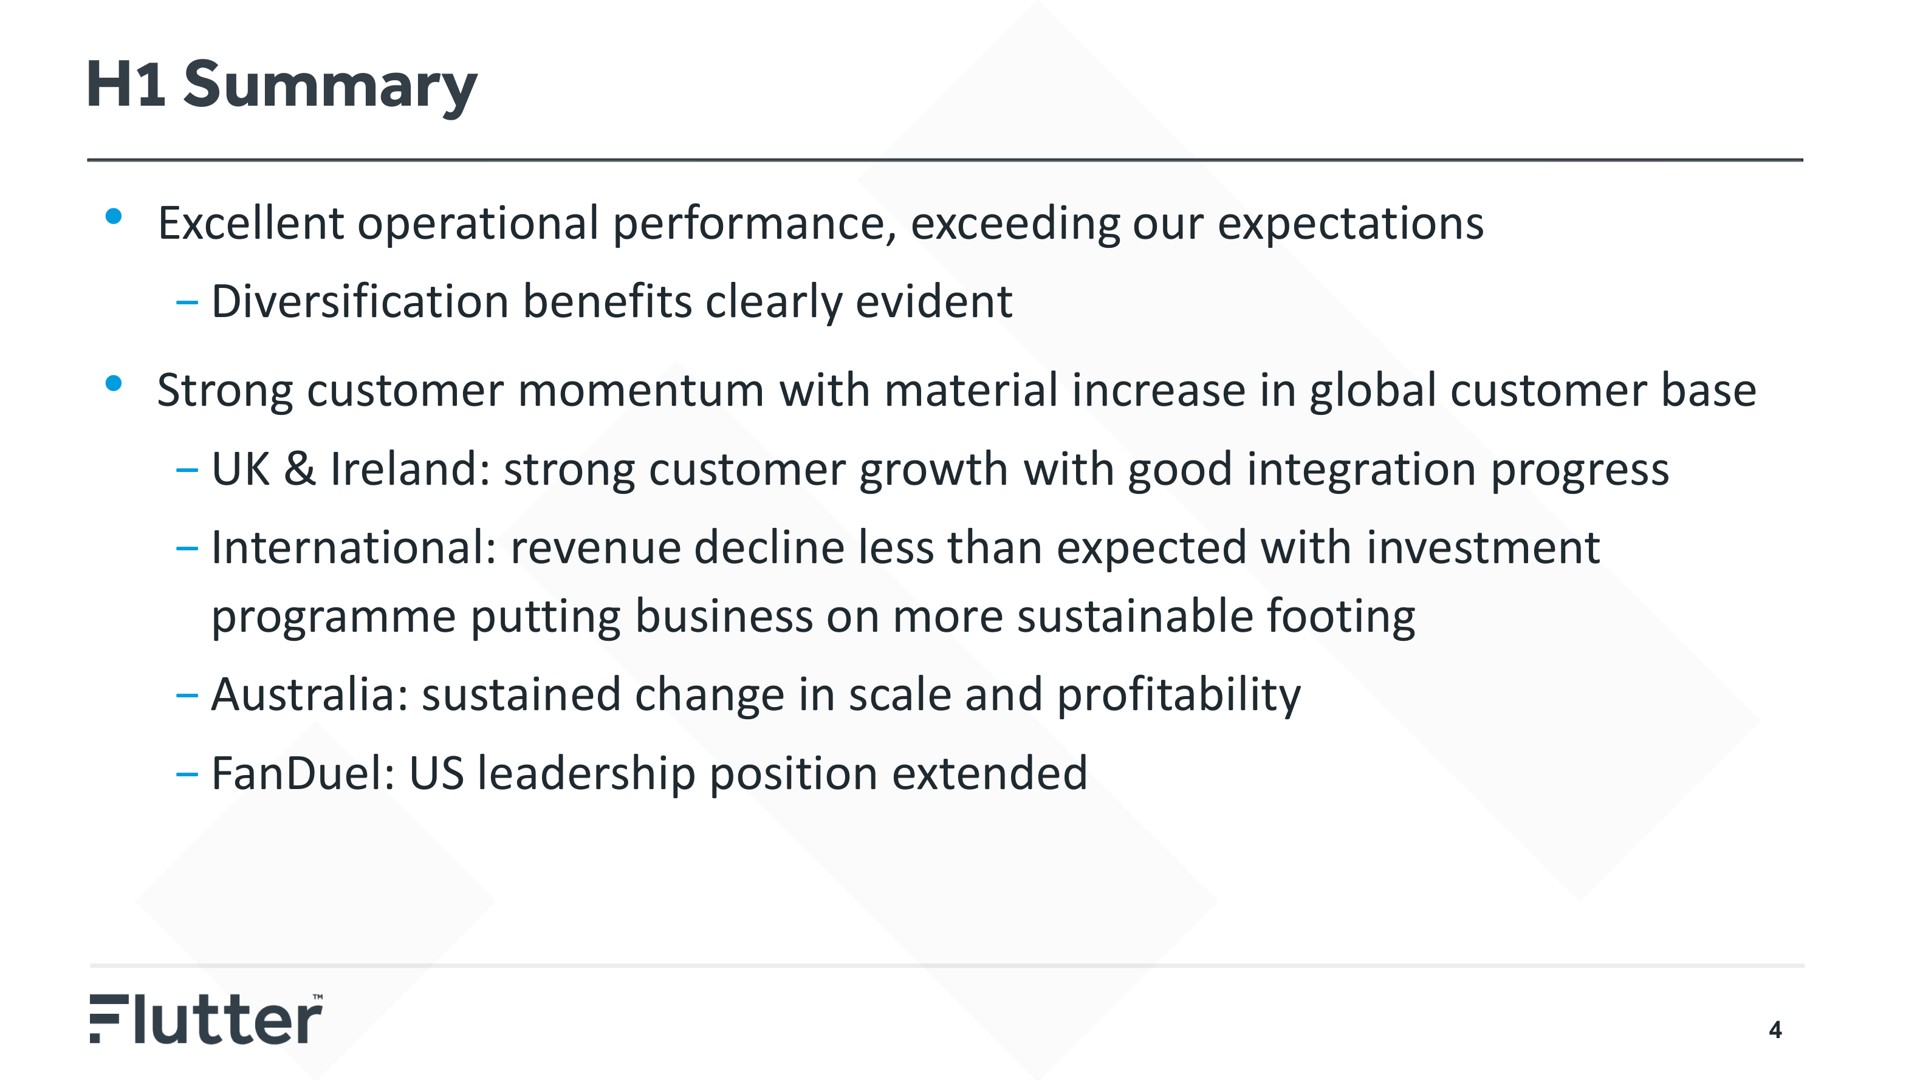 summary excellent operational performance exceeding our expectations diversification benefits clearly evident strong customer momentum with material increase in global customer base strong customer growth with good integration progress international revenue decline less than expected with investment putting business on more sustainable footing sustained change in scale and profitability us leadership position extended | Flutter